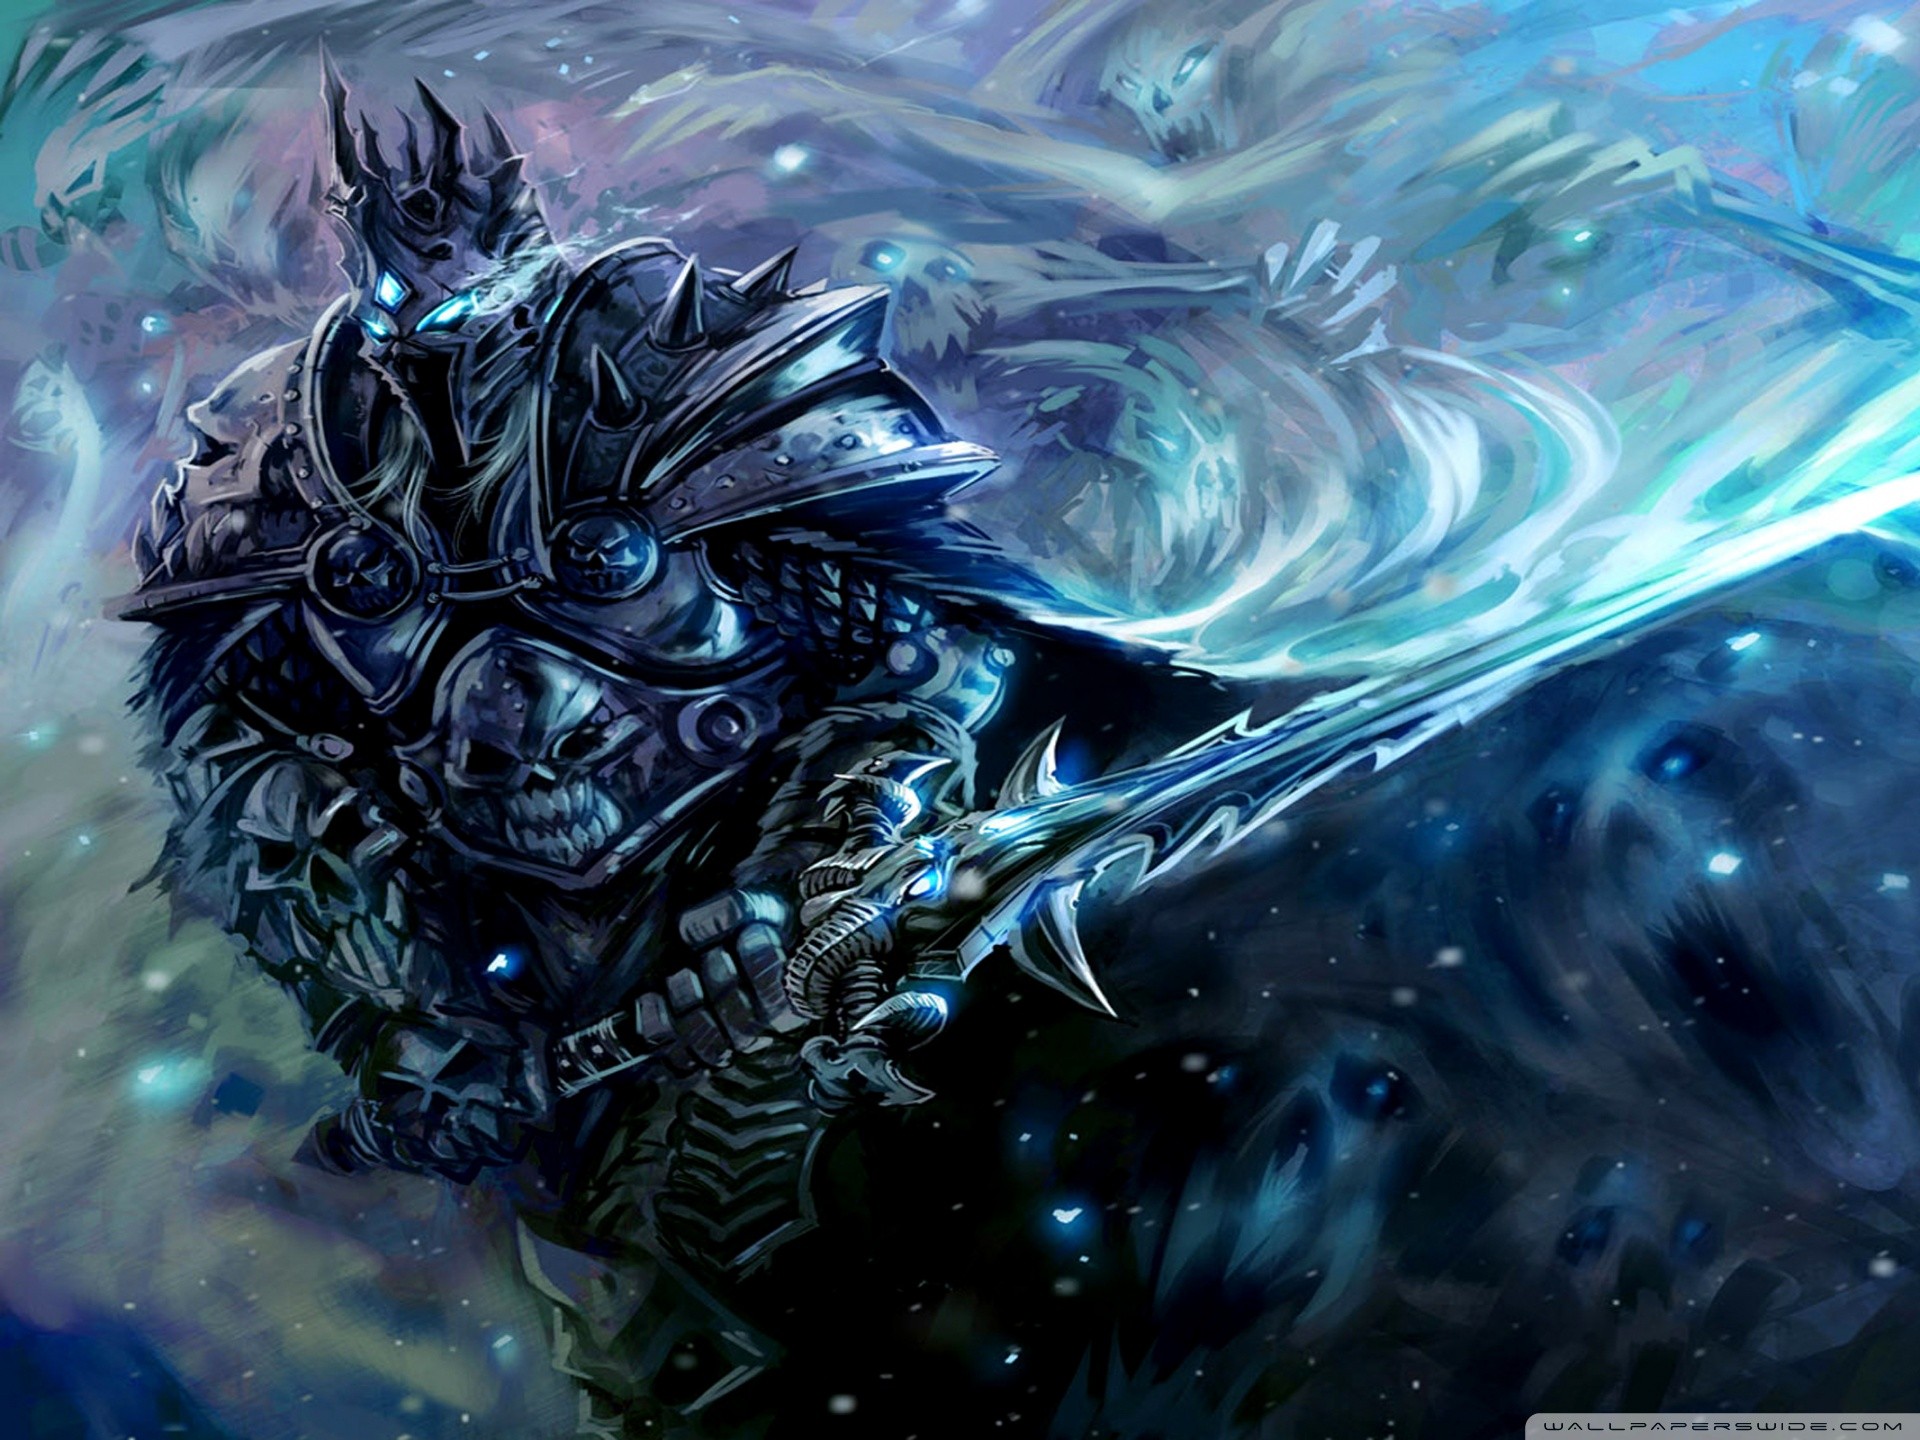 General 1920x1440 World of Warcraft Lich King Blizzard Entertainment World of Warcraft: Wrath of the Lich King PC gaming video game art fantasy art digital art watermarked